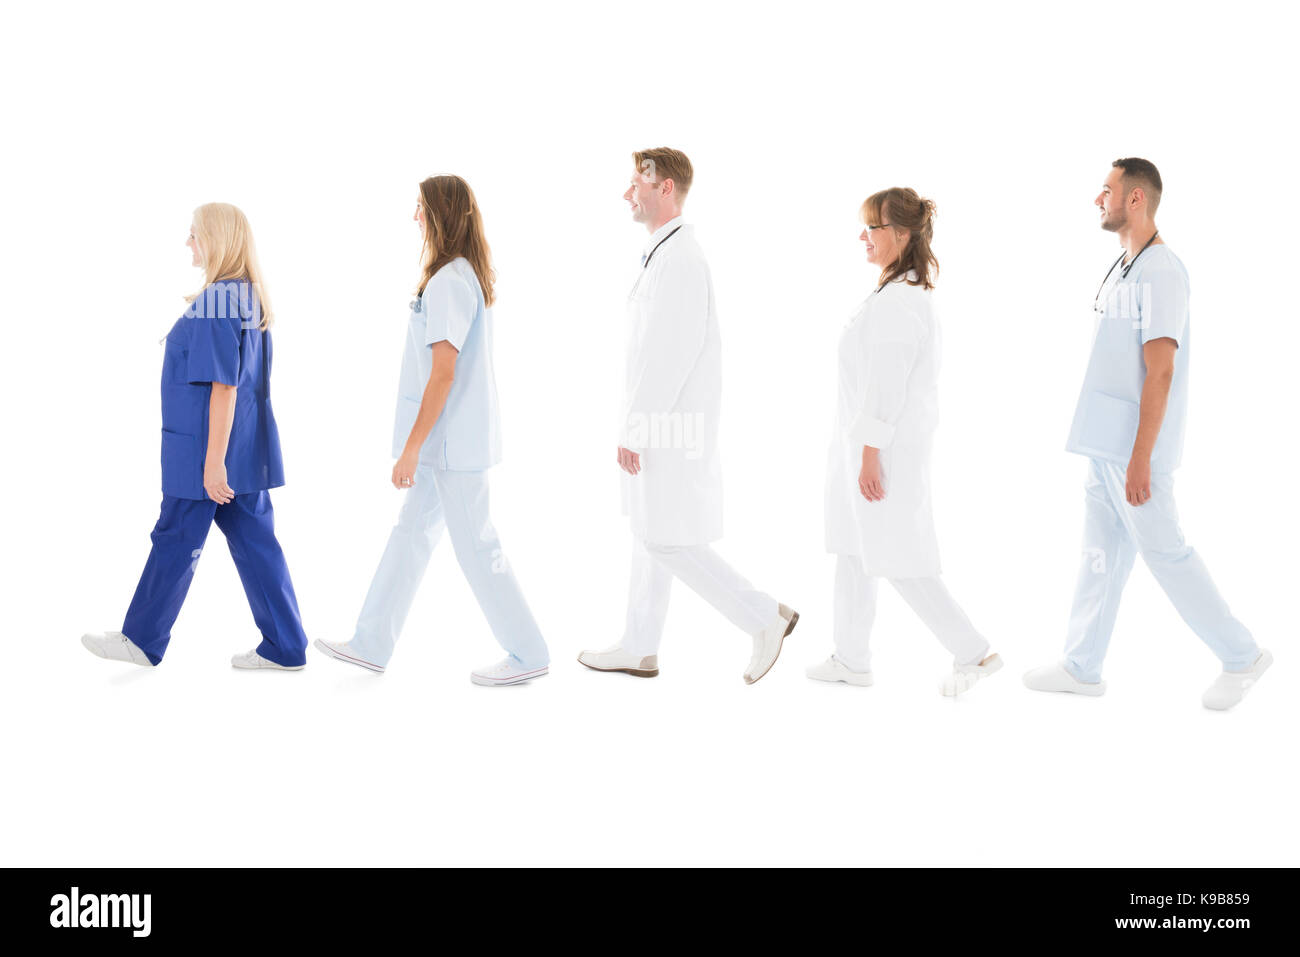 Full length side view of medical professionals walking in row against white background Stock Photo